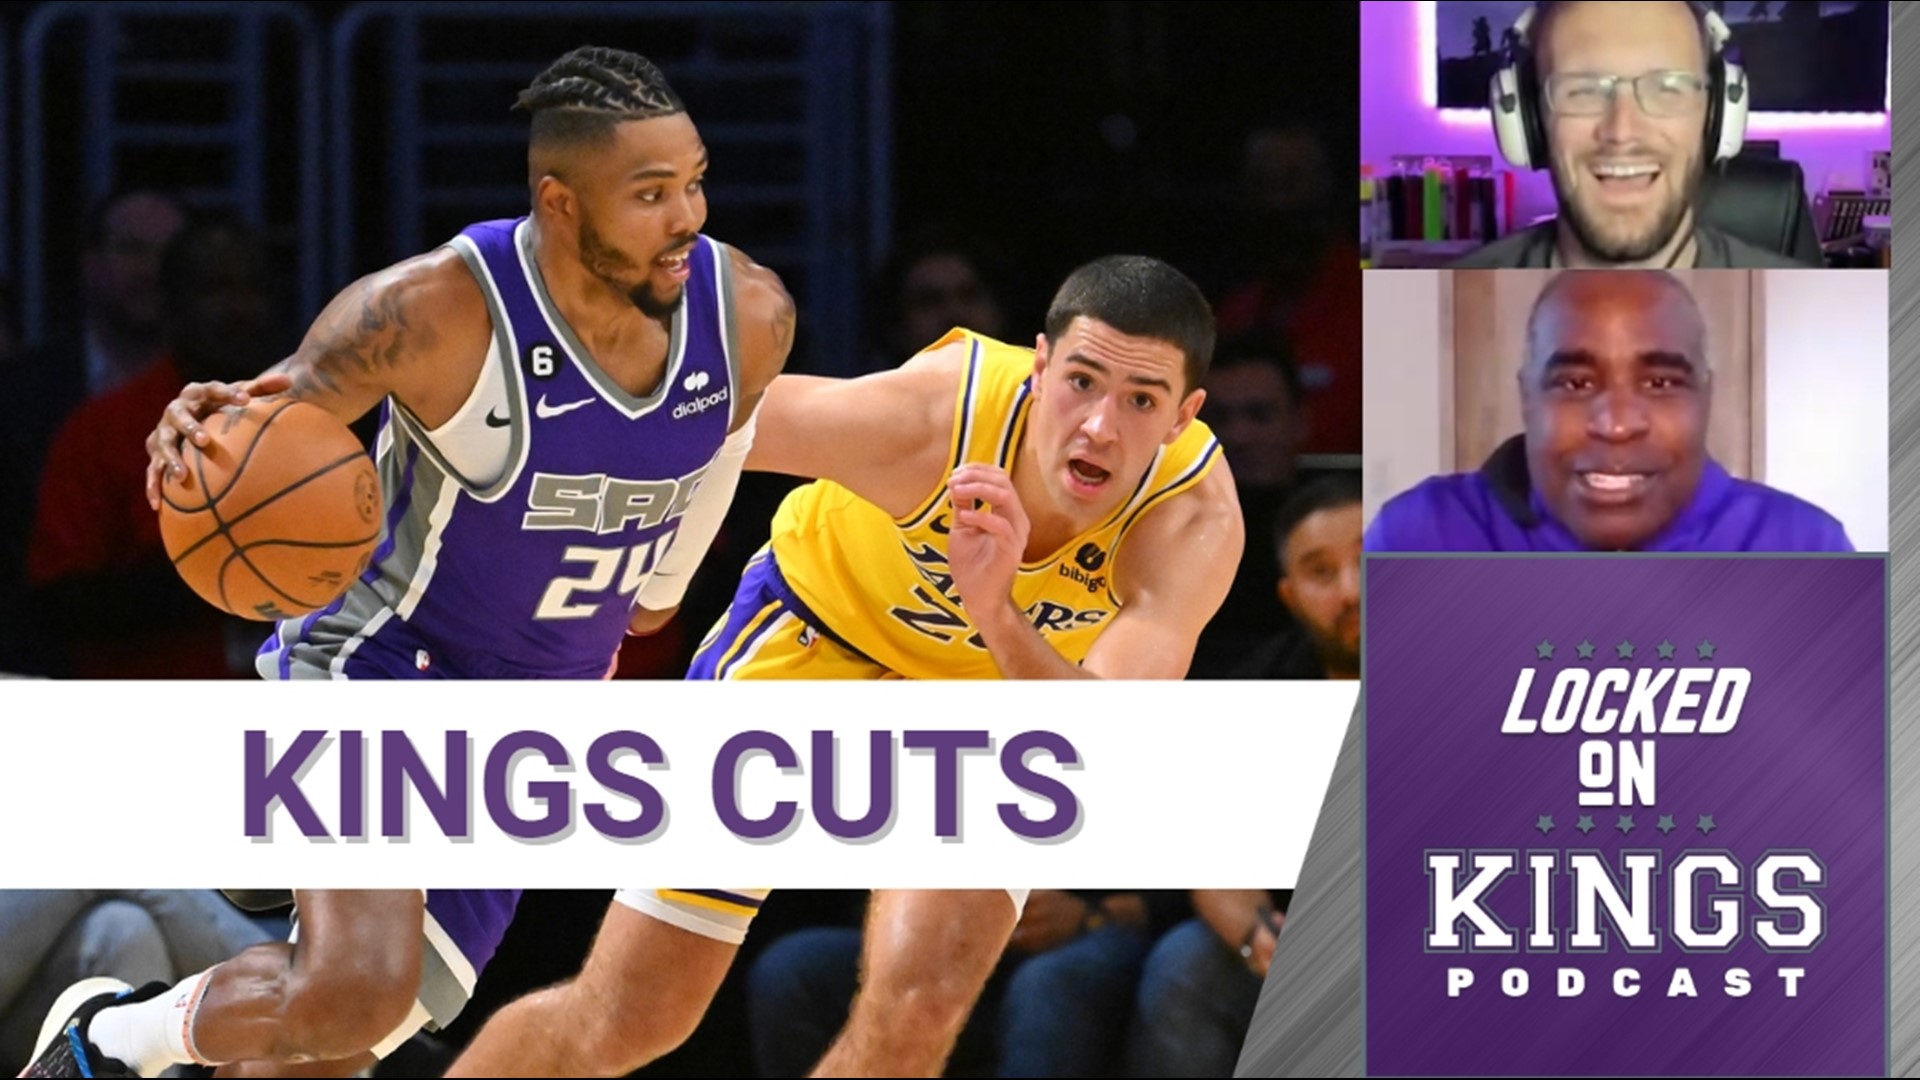 Matt George discusses the first round of Kings cuts before being joined by TV host and play-by-play broadcaster Kyle Draper.